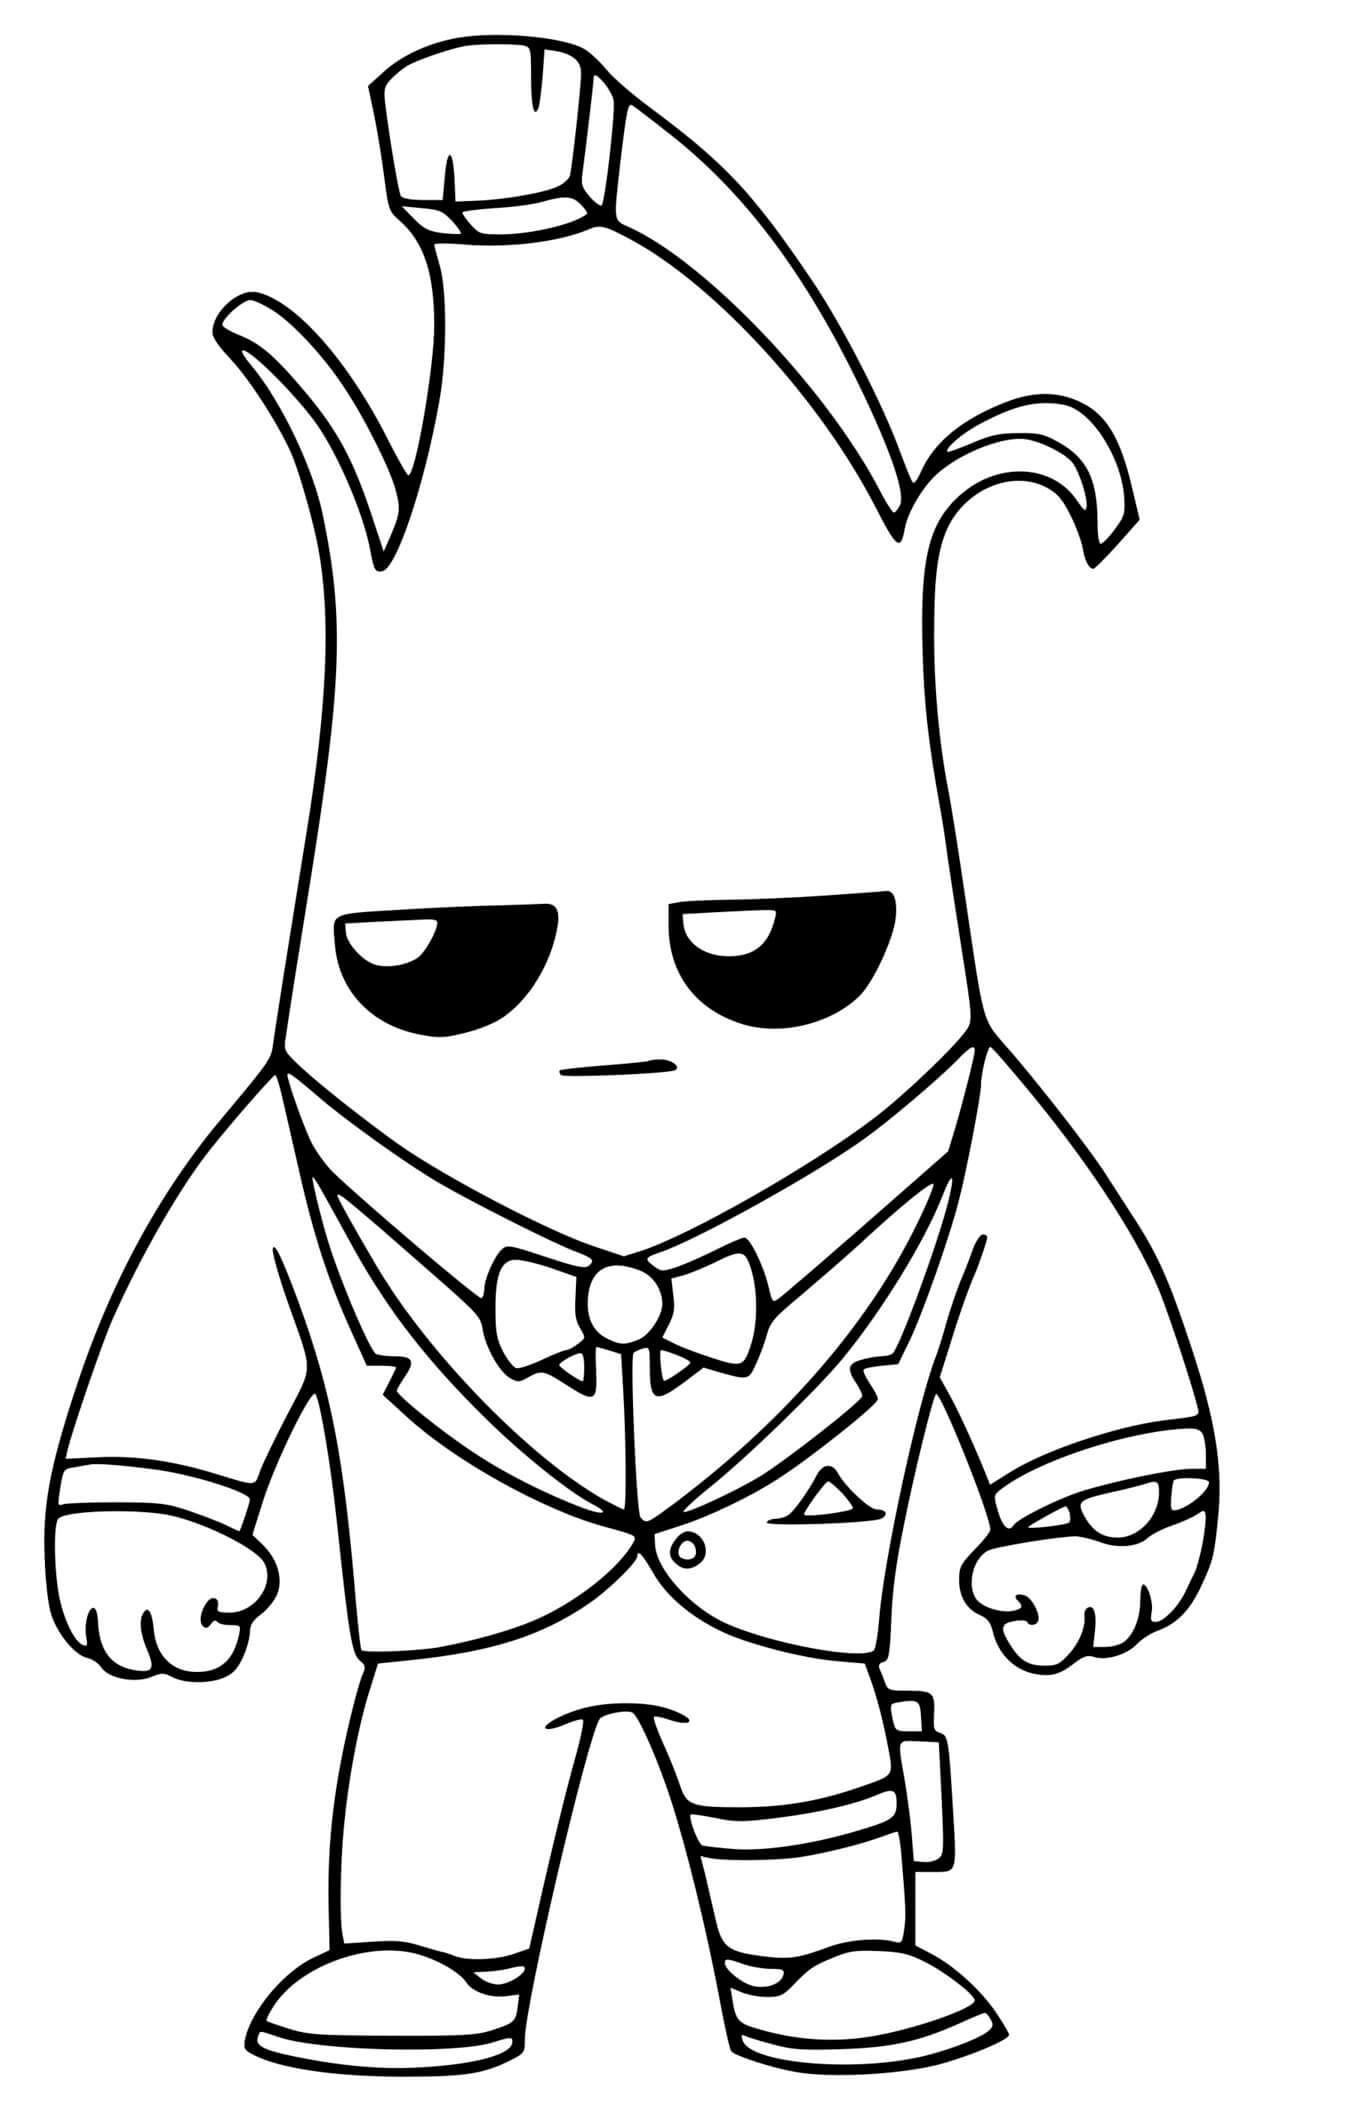 Agent Peely Top Secret Fortnite Coloring Page